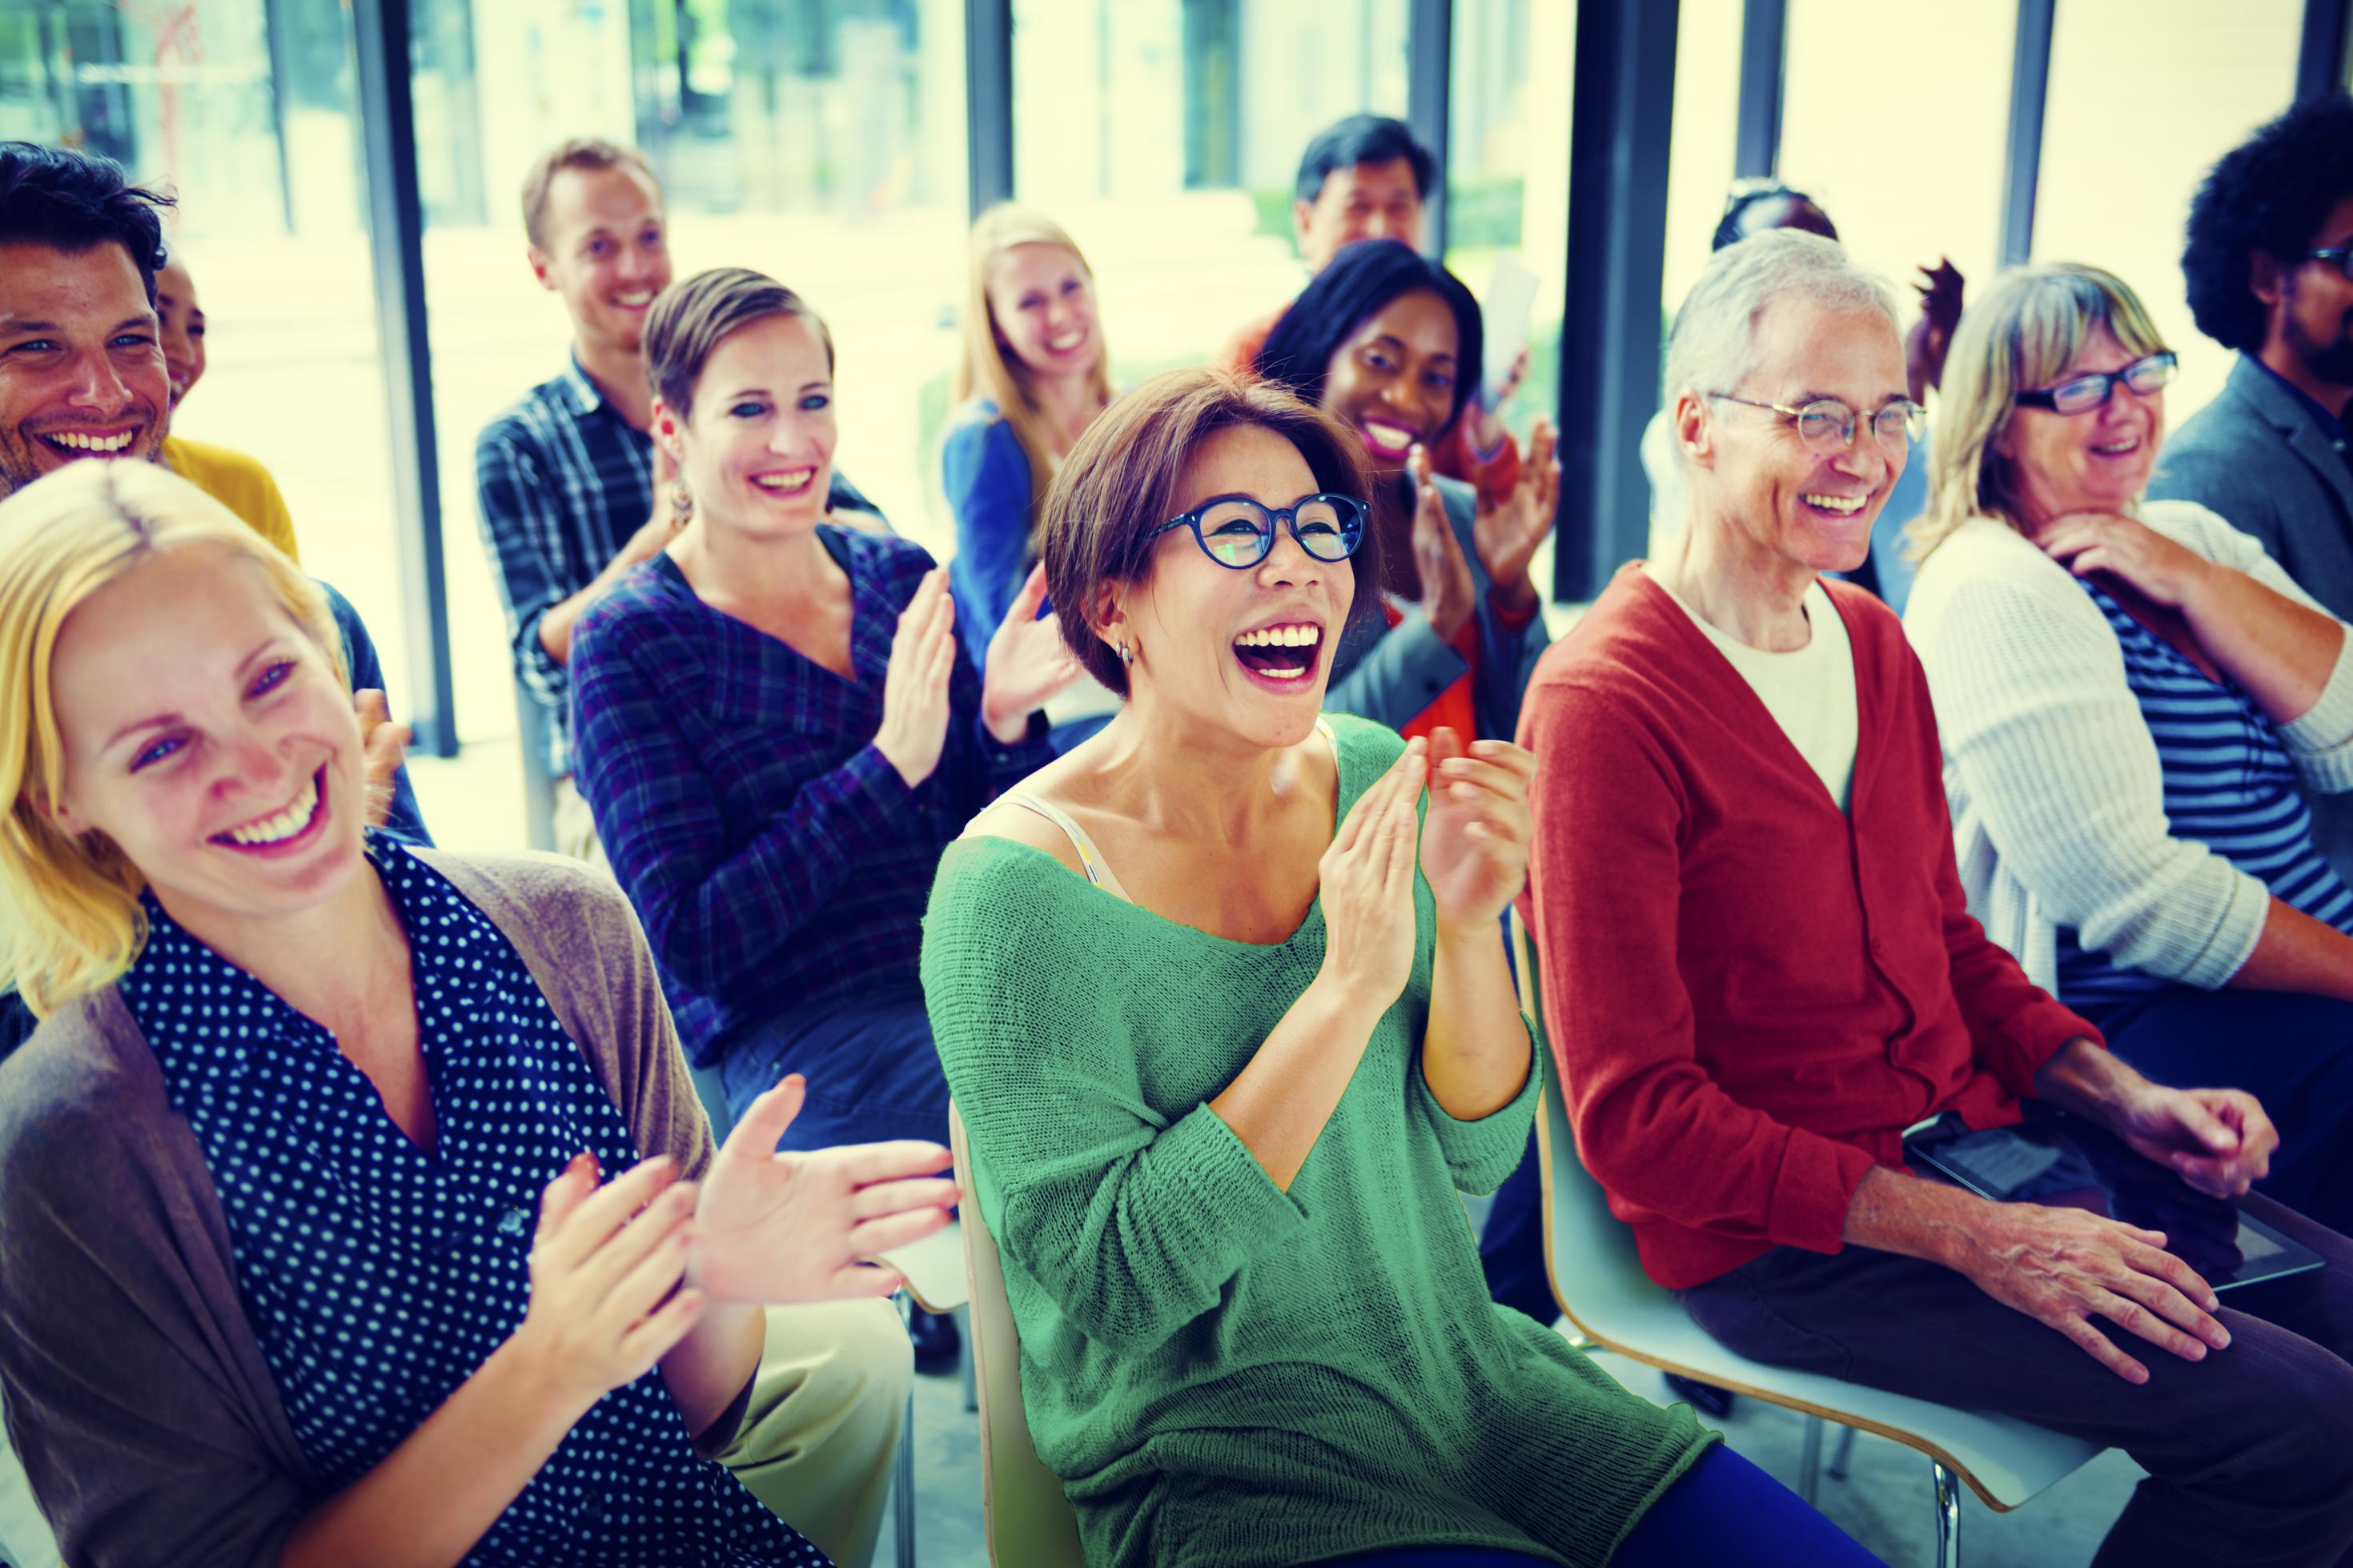 Audience Applaud Clapping Happines Appreciation Training Concept